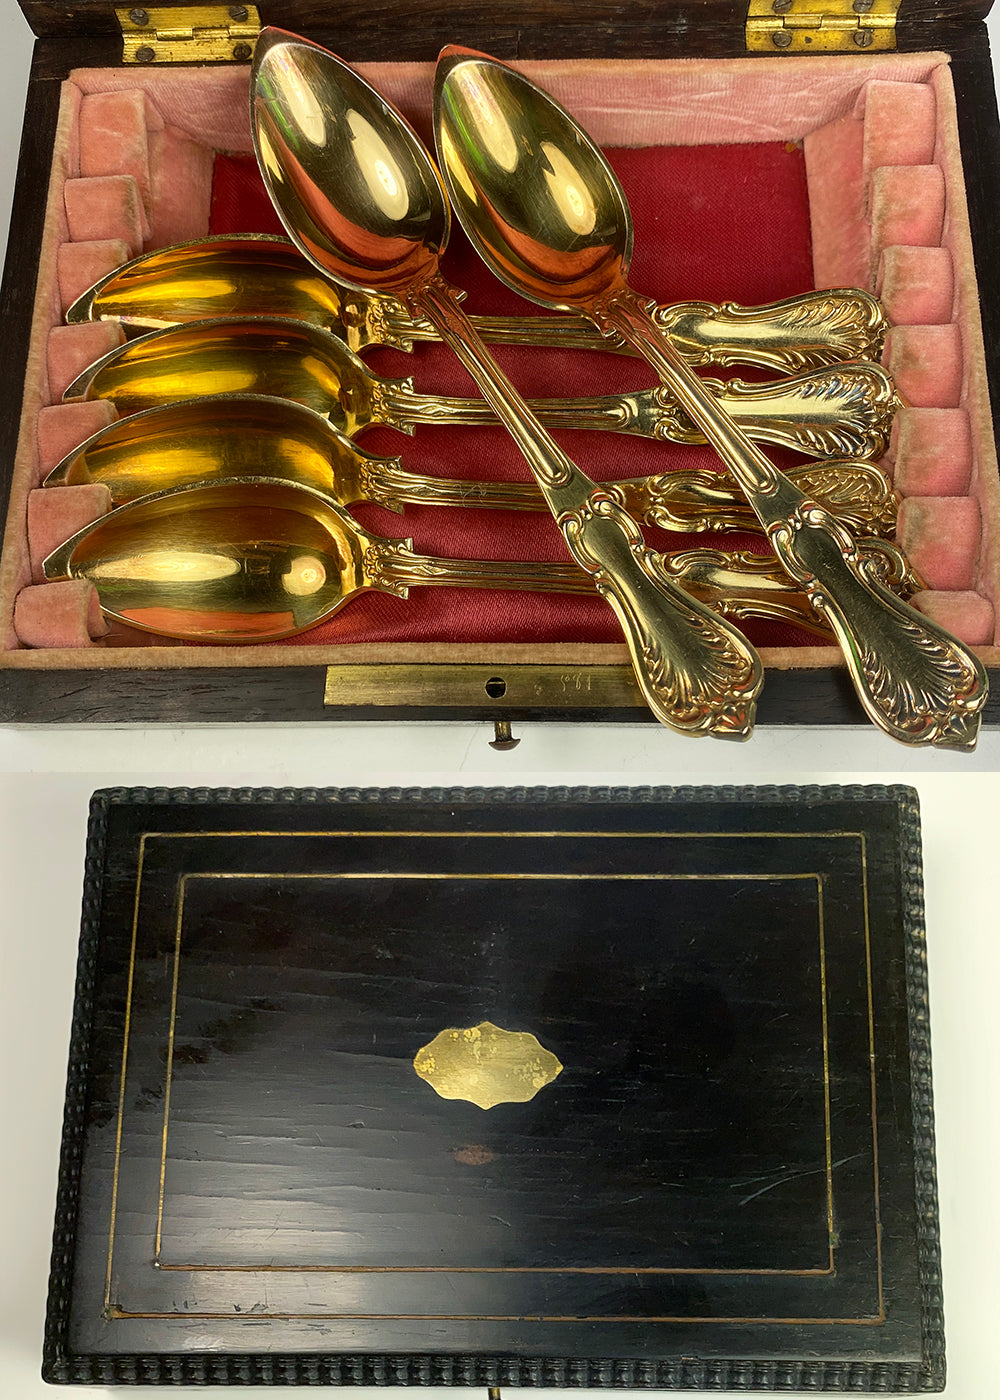 Elegant Antique French Sterling Silver 18k Gold Vermeil Spoon Set of 6 in Wood Box